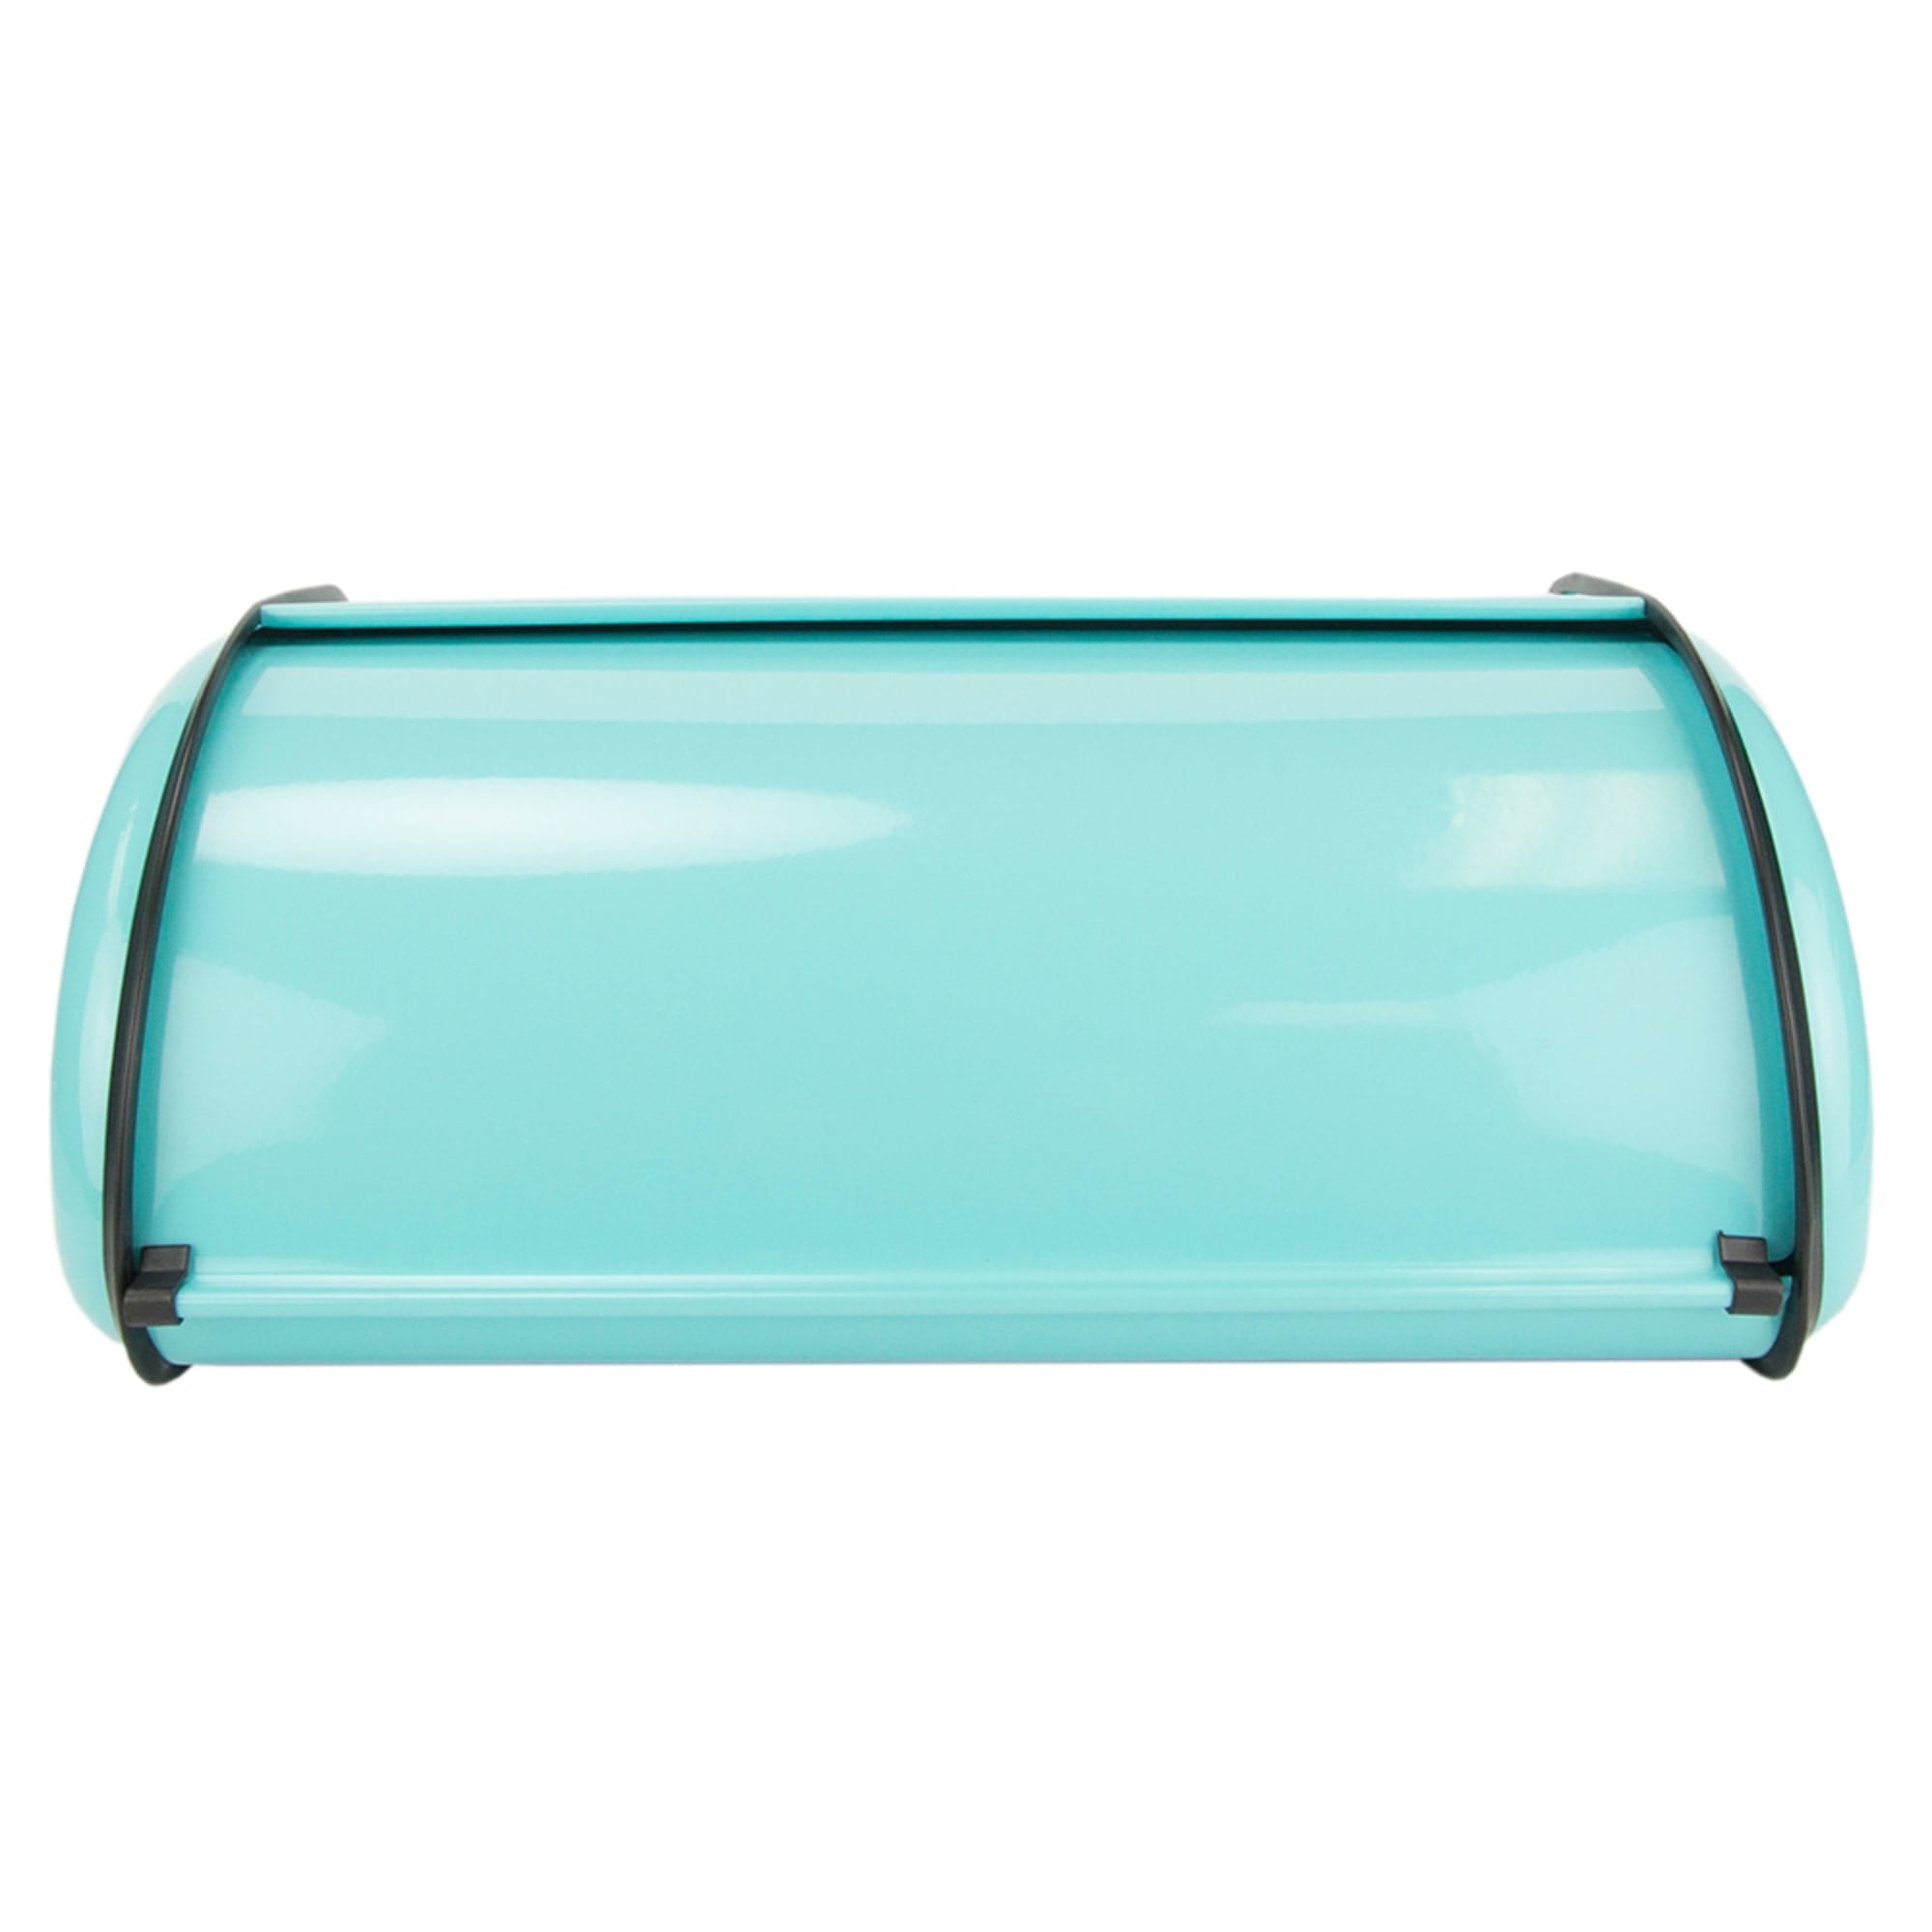 Home Basics Roll Up Lid Metal Bread Box, Turquoise $20.00 EACH, CASE PACK OF 6